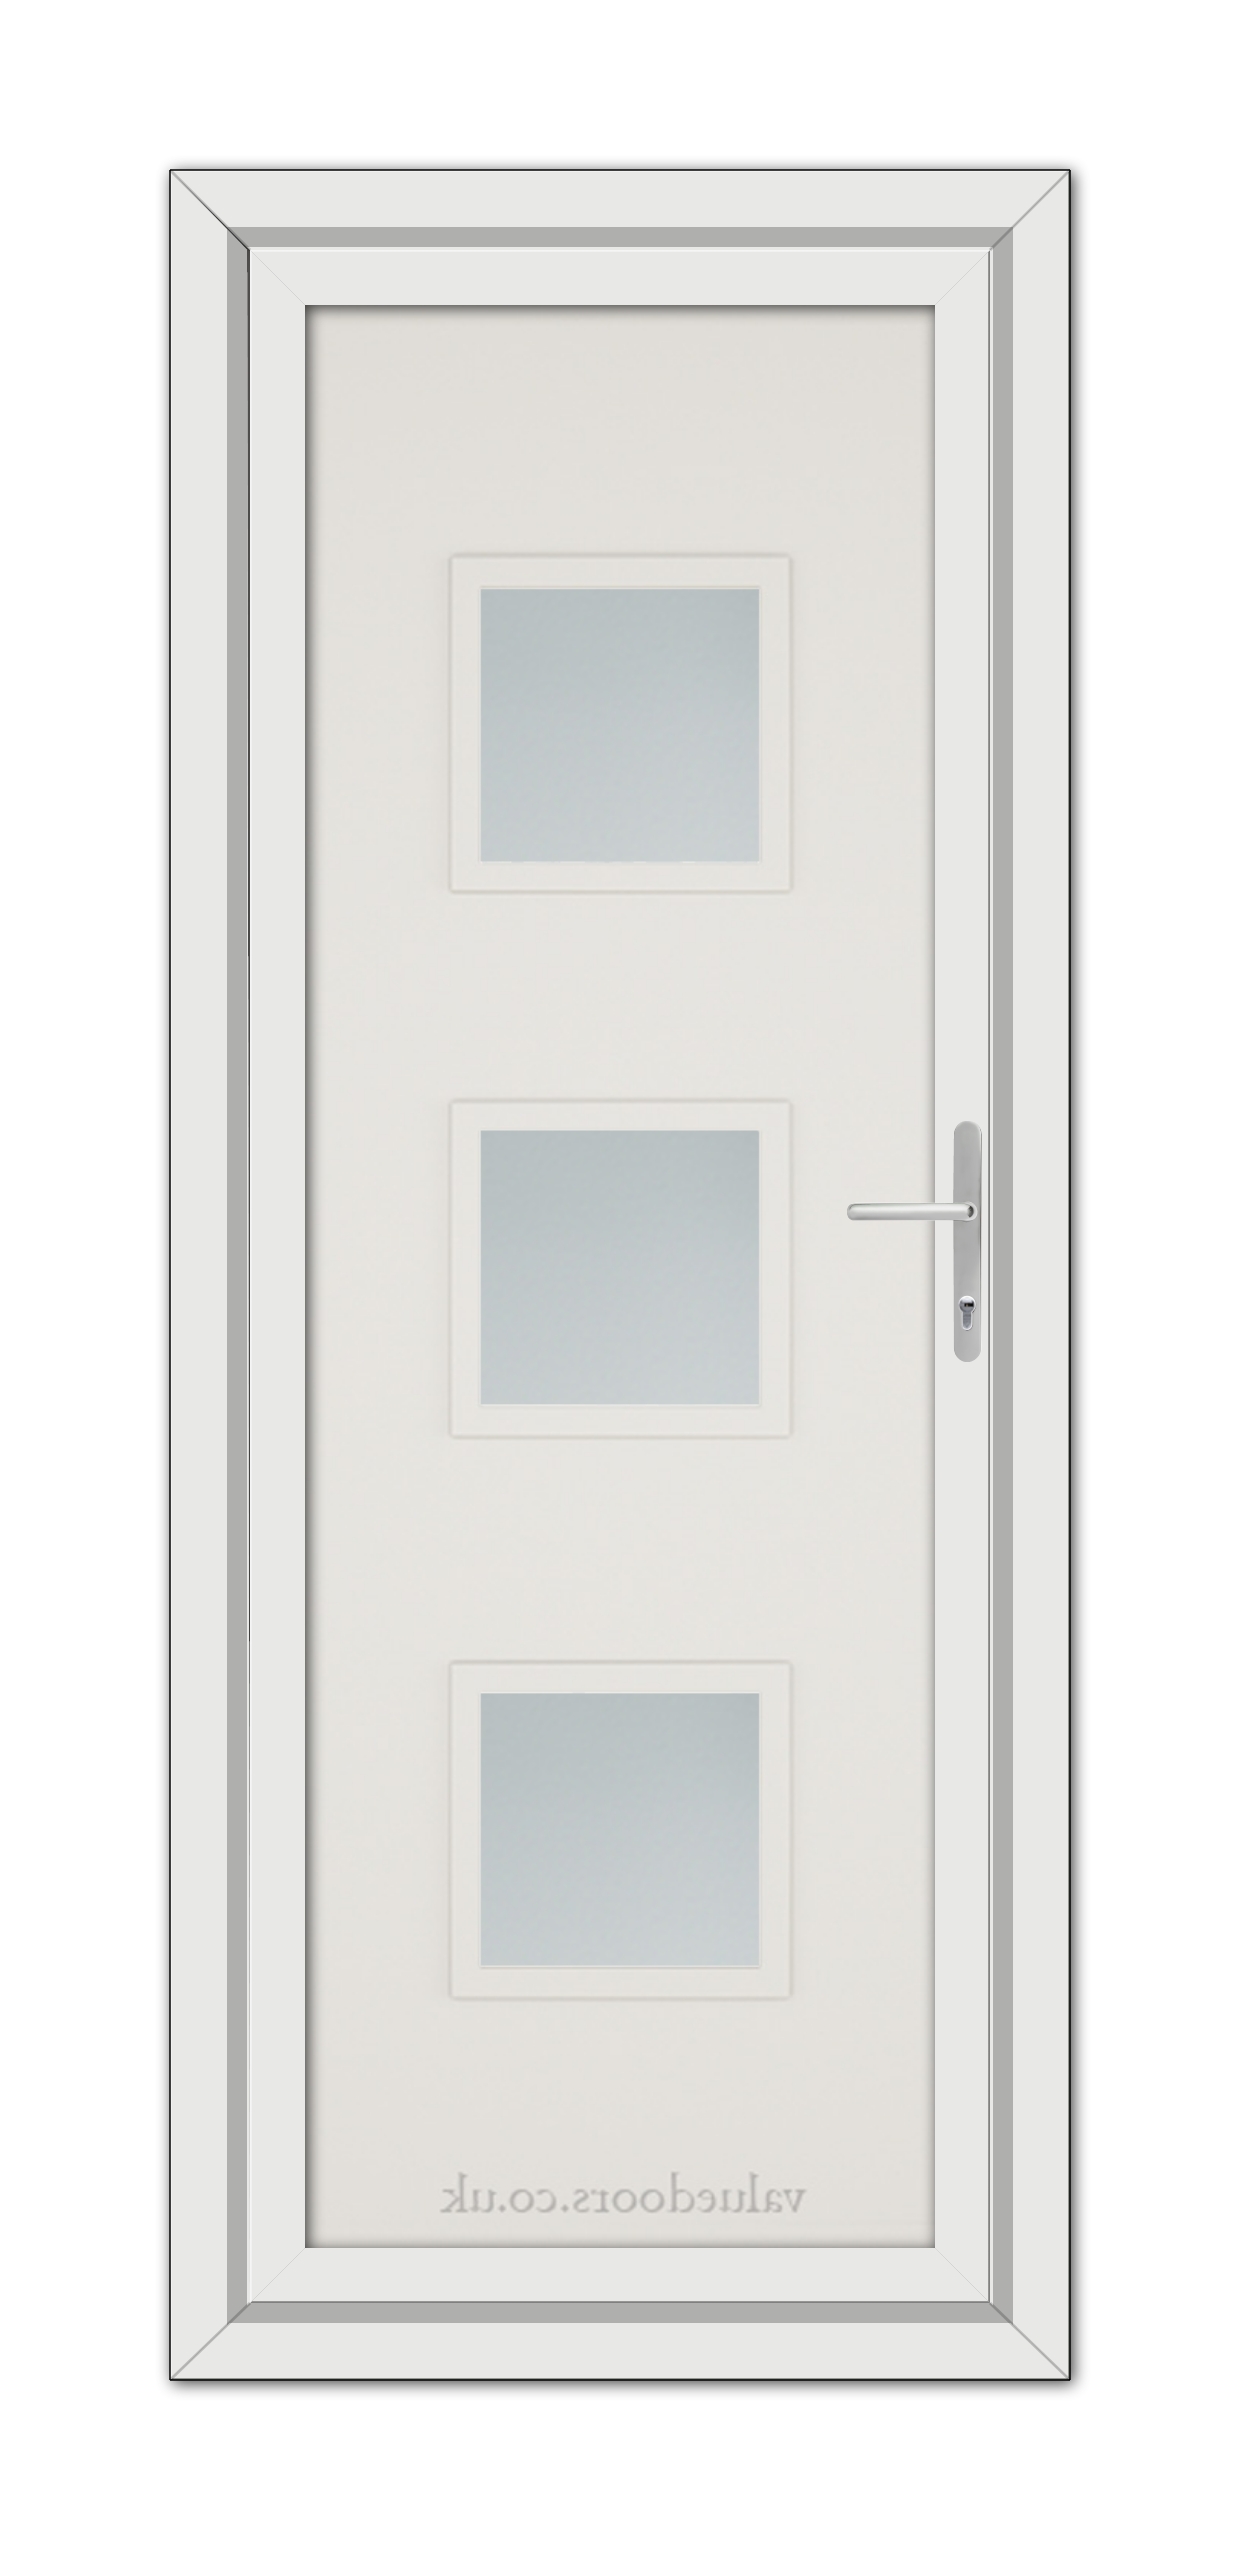 A White Cream Modern 5013 uPVC Door with three frosted glass panels and a metallic handle, displayed against a white background.